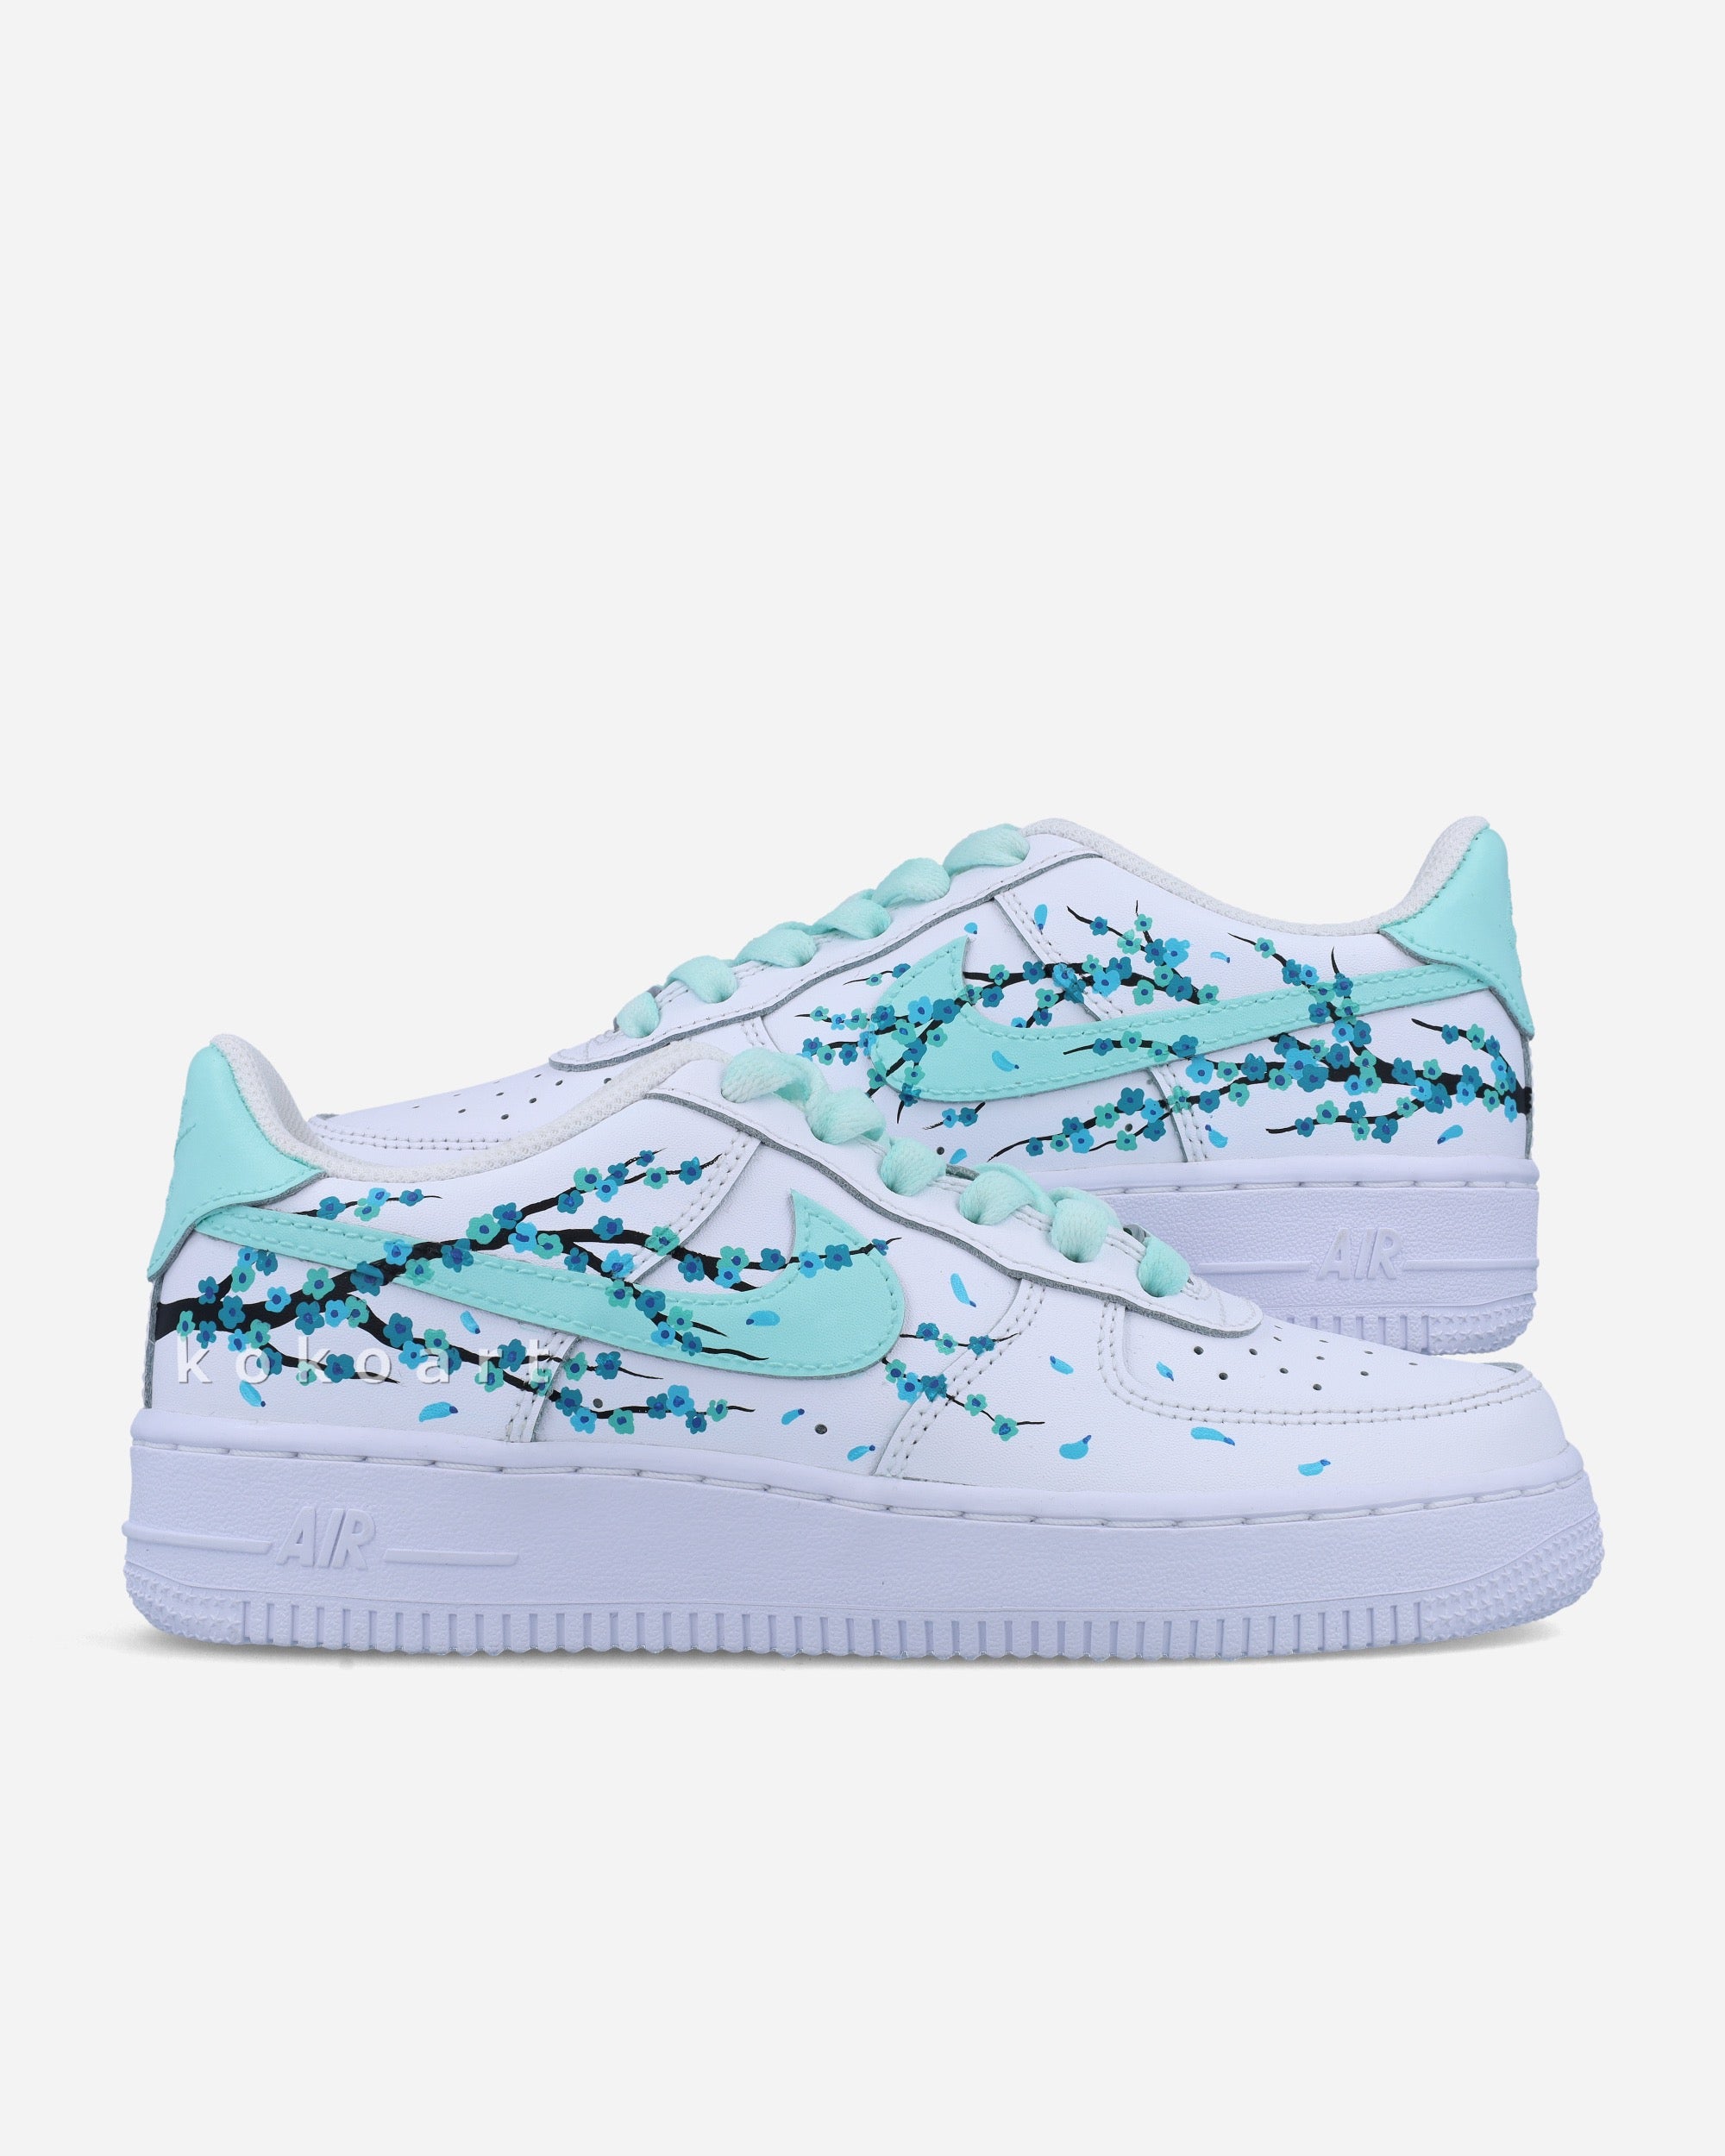 AF1 Pastel Teal Turquoise Cherry Blossom